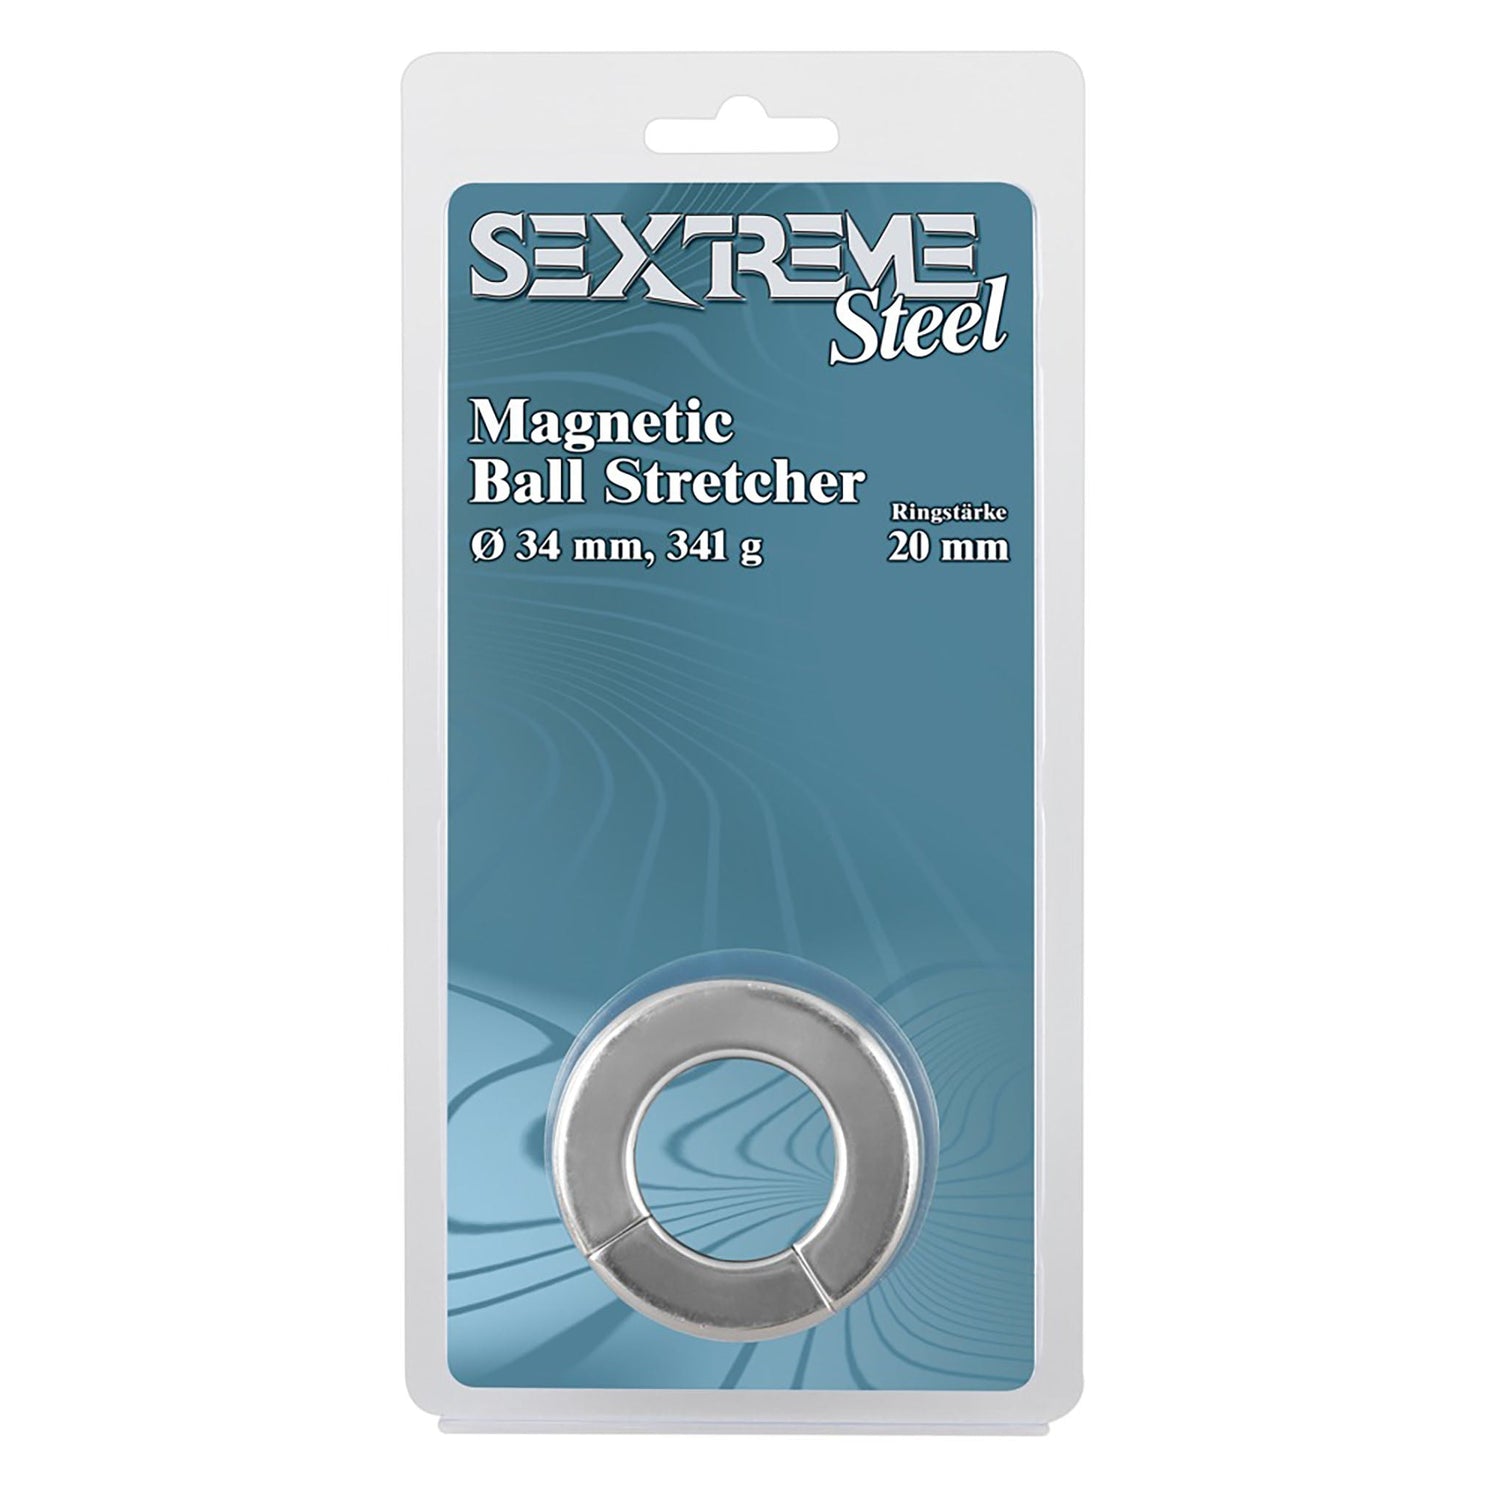 Magnetic Ball Stretcher Hodenring, Verpackung